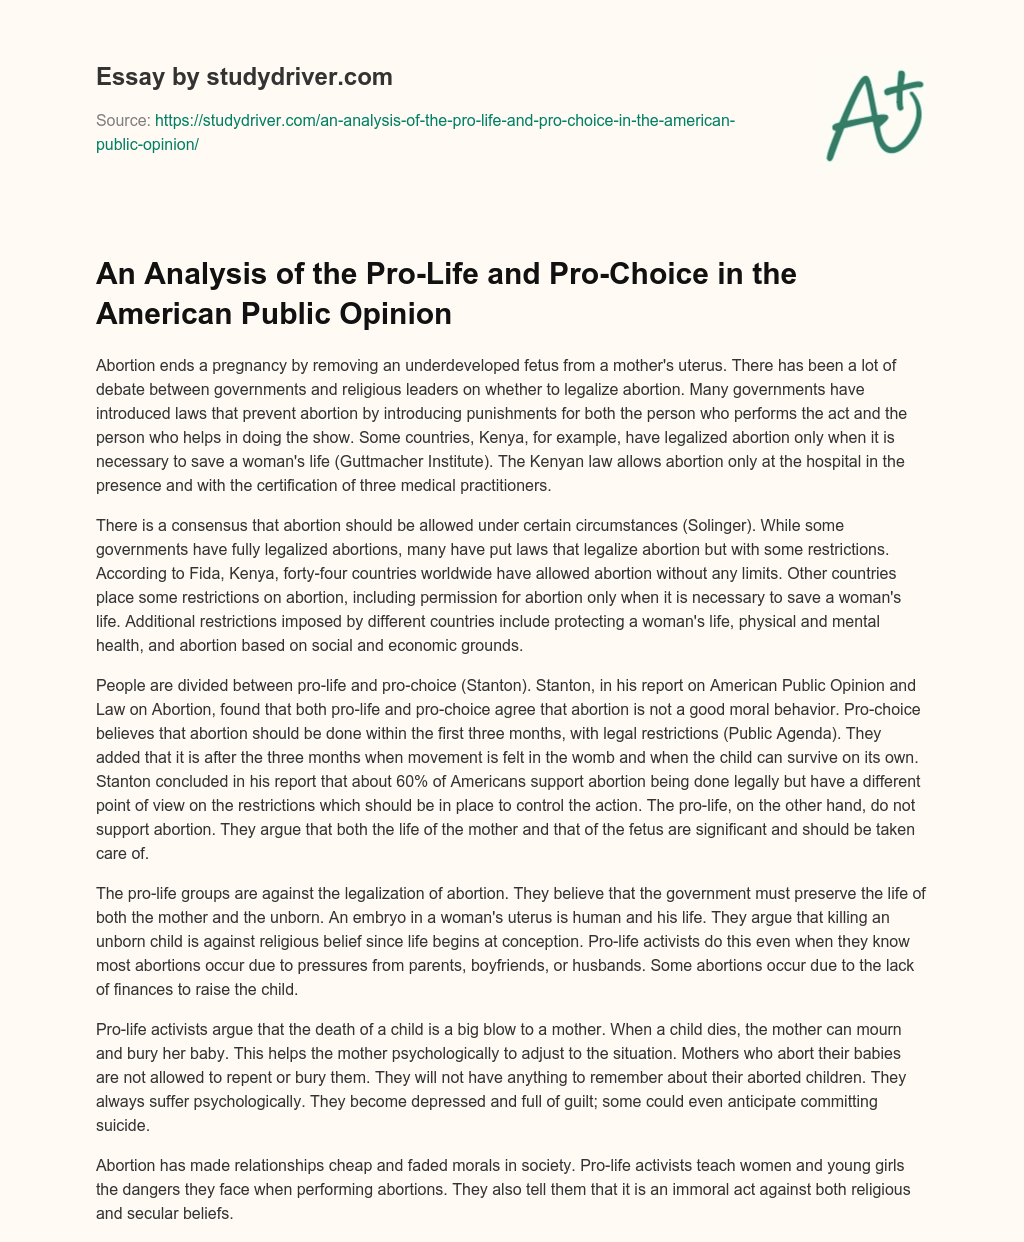 An Analysis of the Pro-Life and Pro-Choice in the American Public Opinion essay